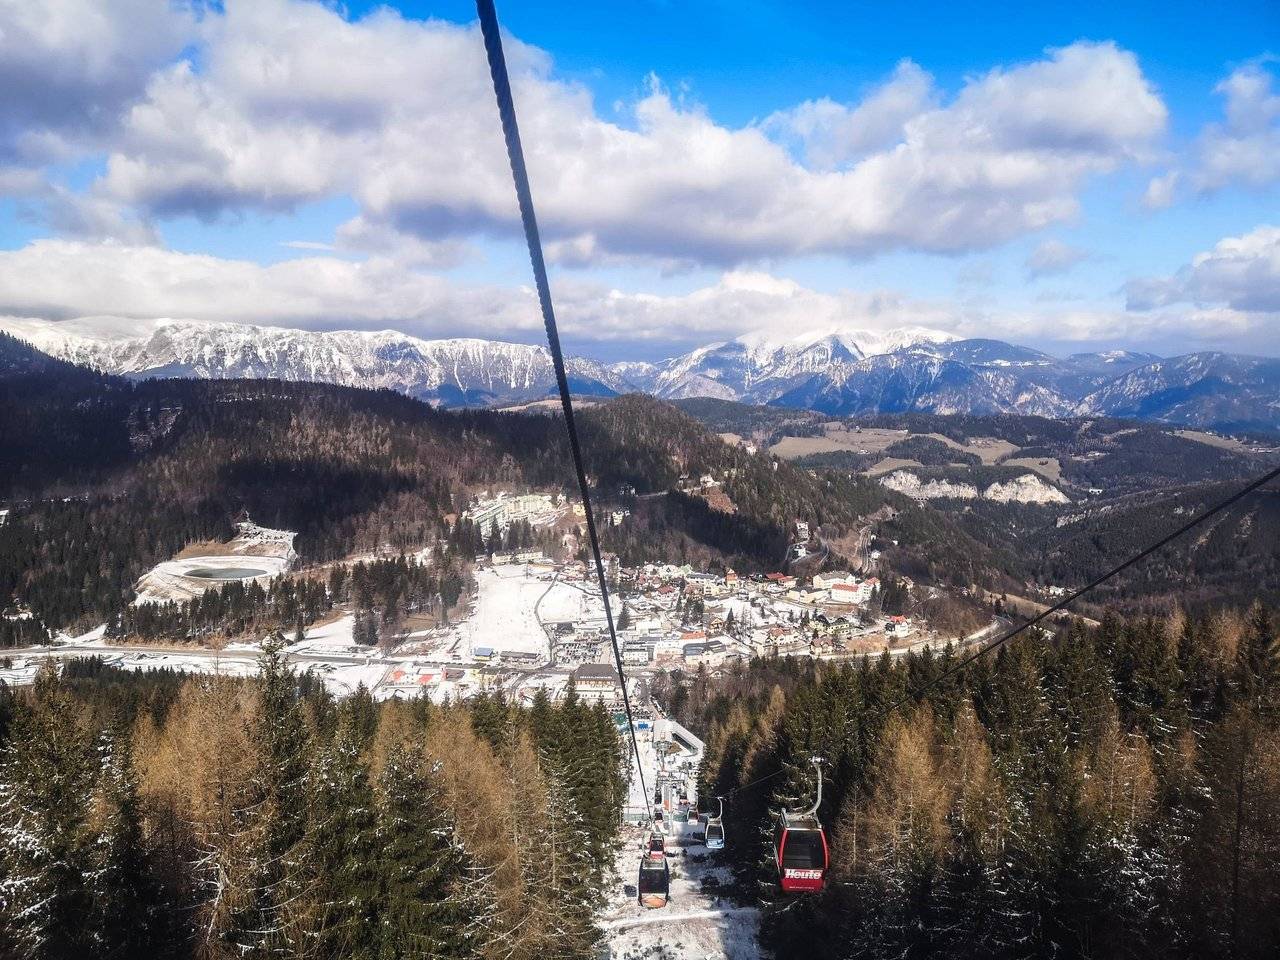   The ski lift alone is a venture worth your time. Photo by Alis Monte [CC BY-SA 4.0], via Connecting the Dots